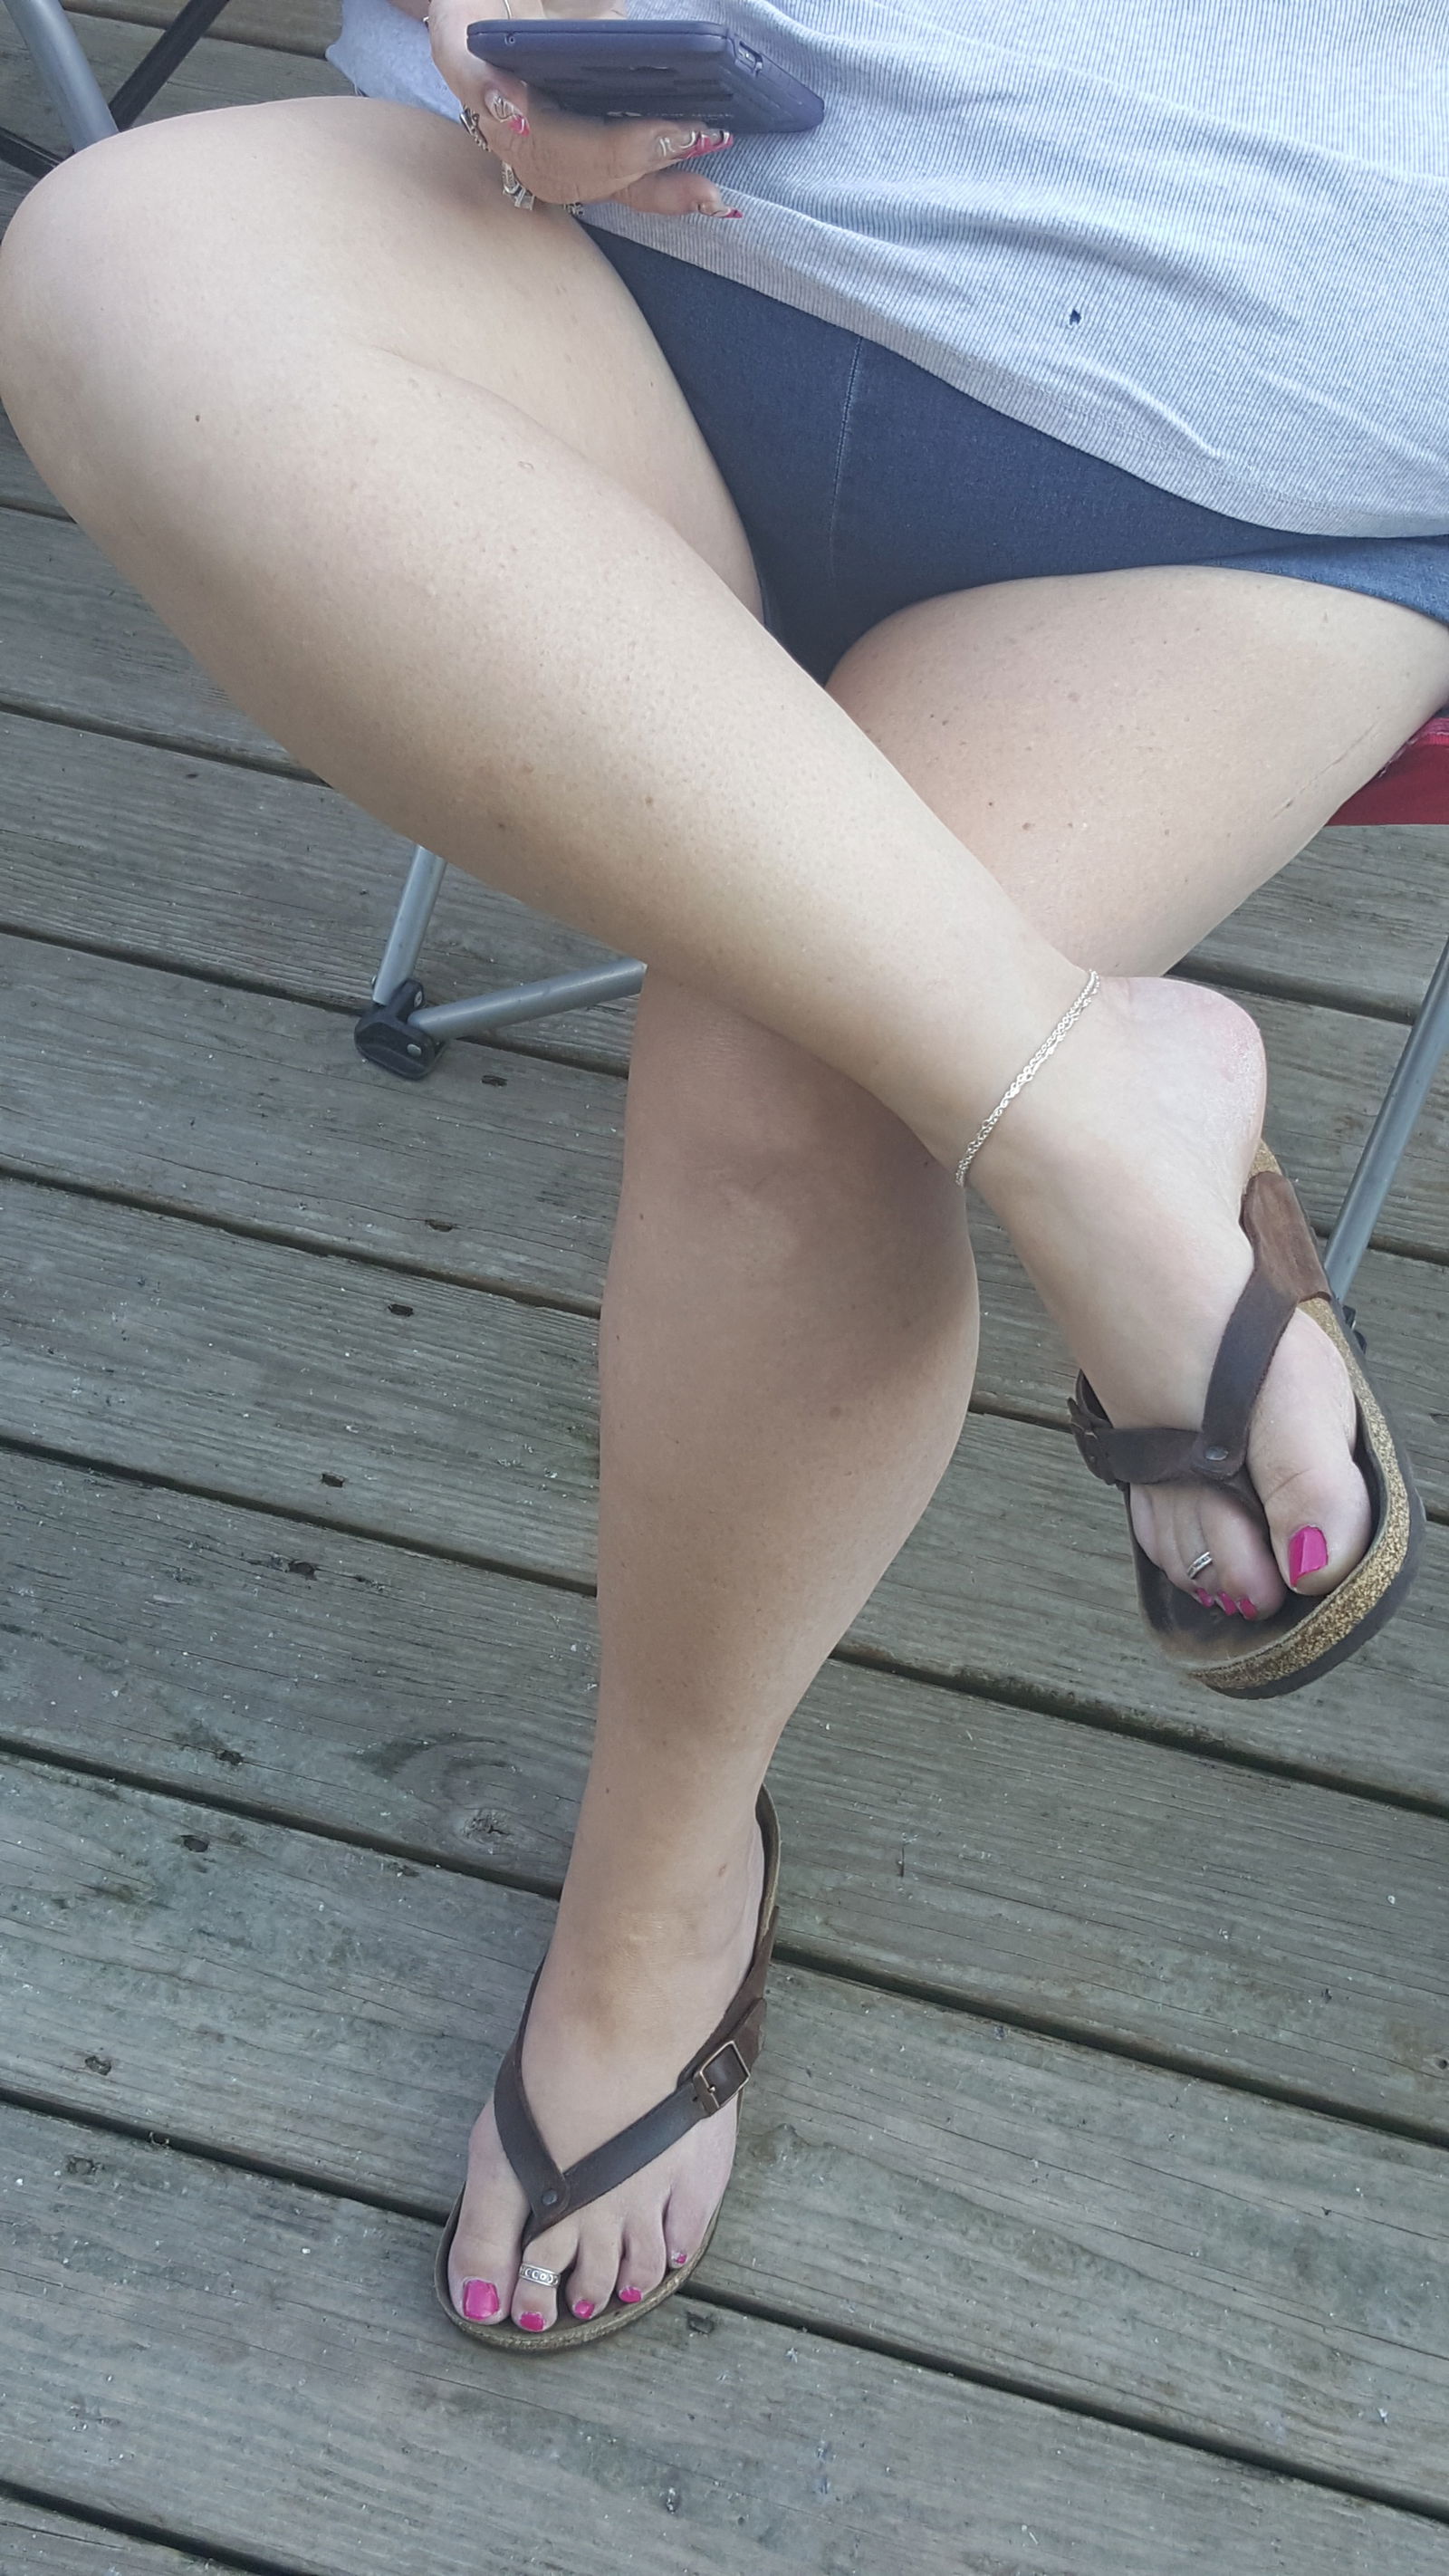 Photo by Dawn42D with the username @Dawn42D,  August 19, 2017 at 2:41 PM and the text says 'The sexy legs and anklet of a smoking hotwife! #smoking  #sexy  #legs  #hotwife  #anklet  #hotwife  #anklet  #married  #but  #available  #slut  #wife  #slut  #shared  #wife  #milf  #sexy  #milf  #sexy  #WVHotBBW  #Dawn42D'